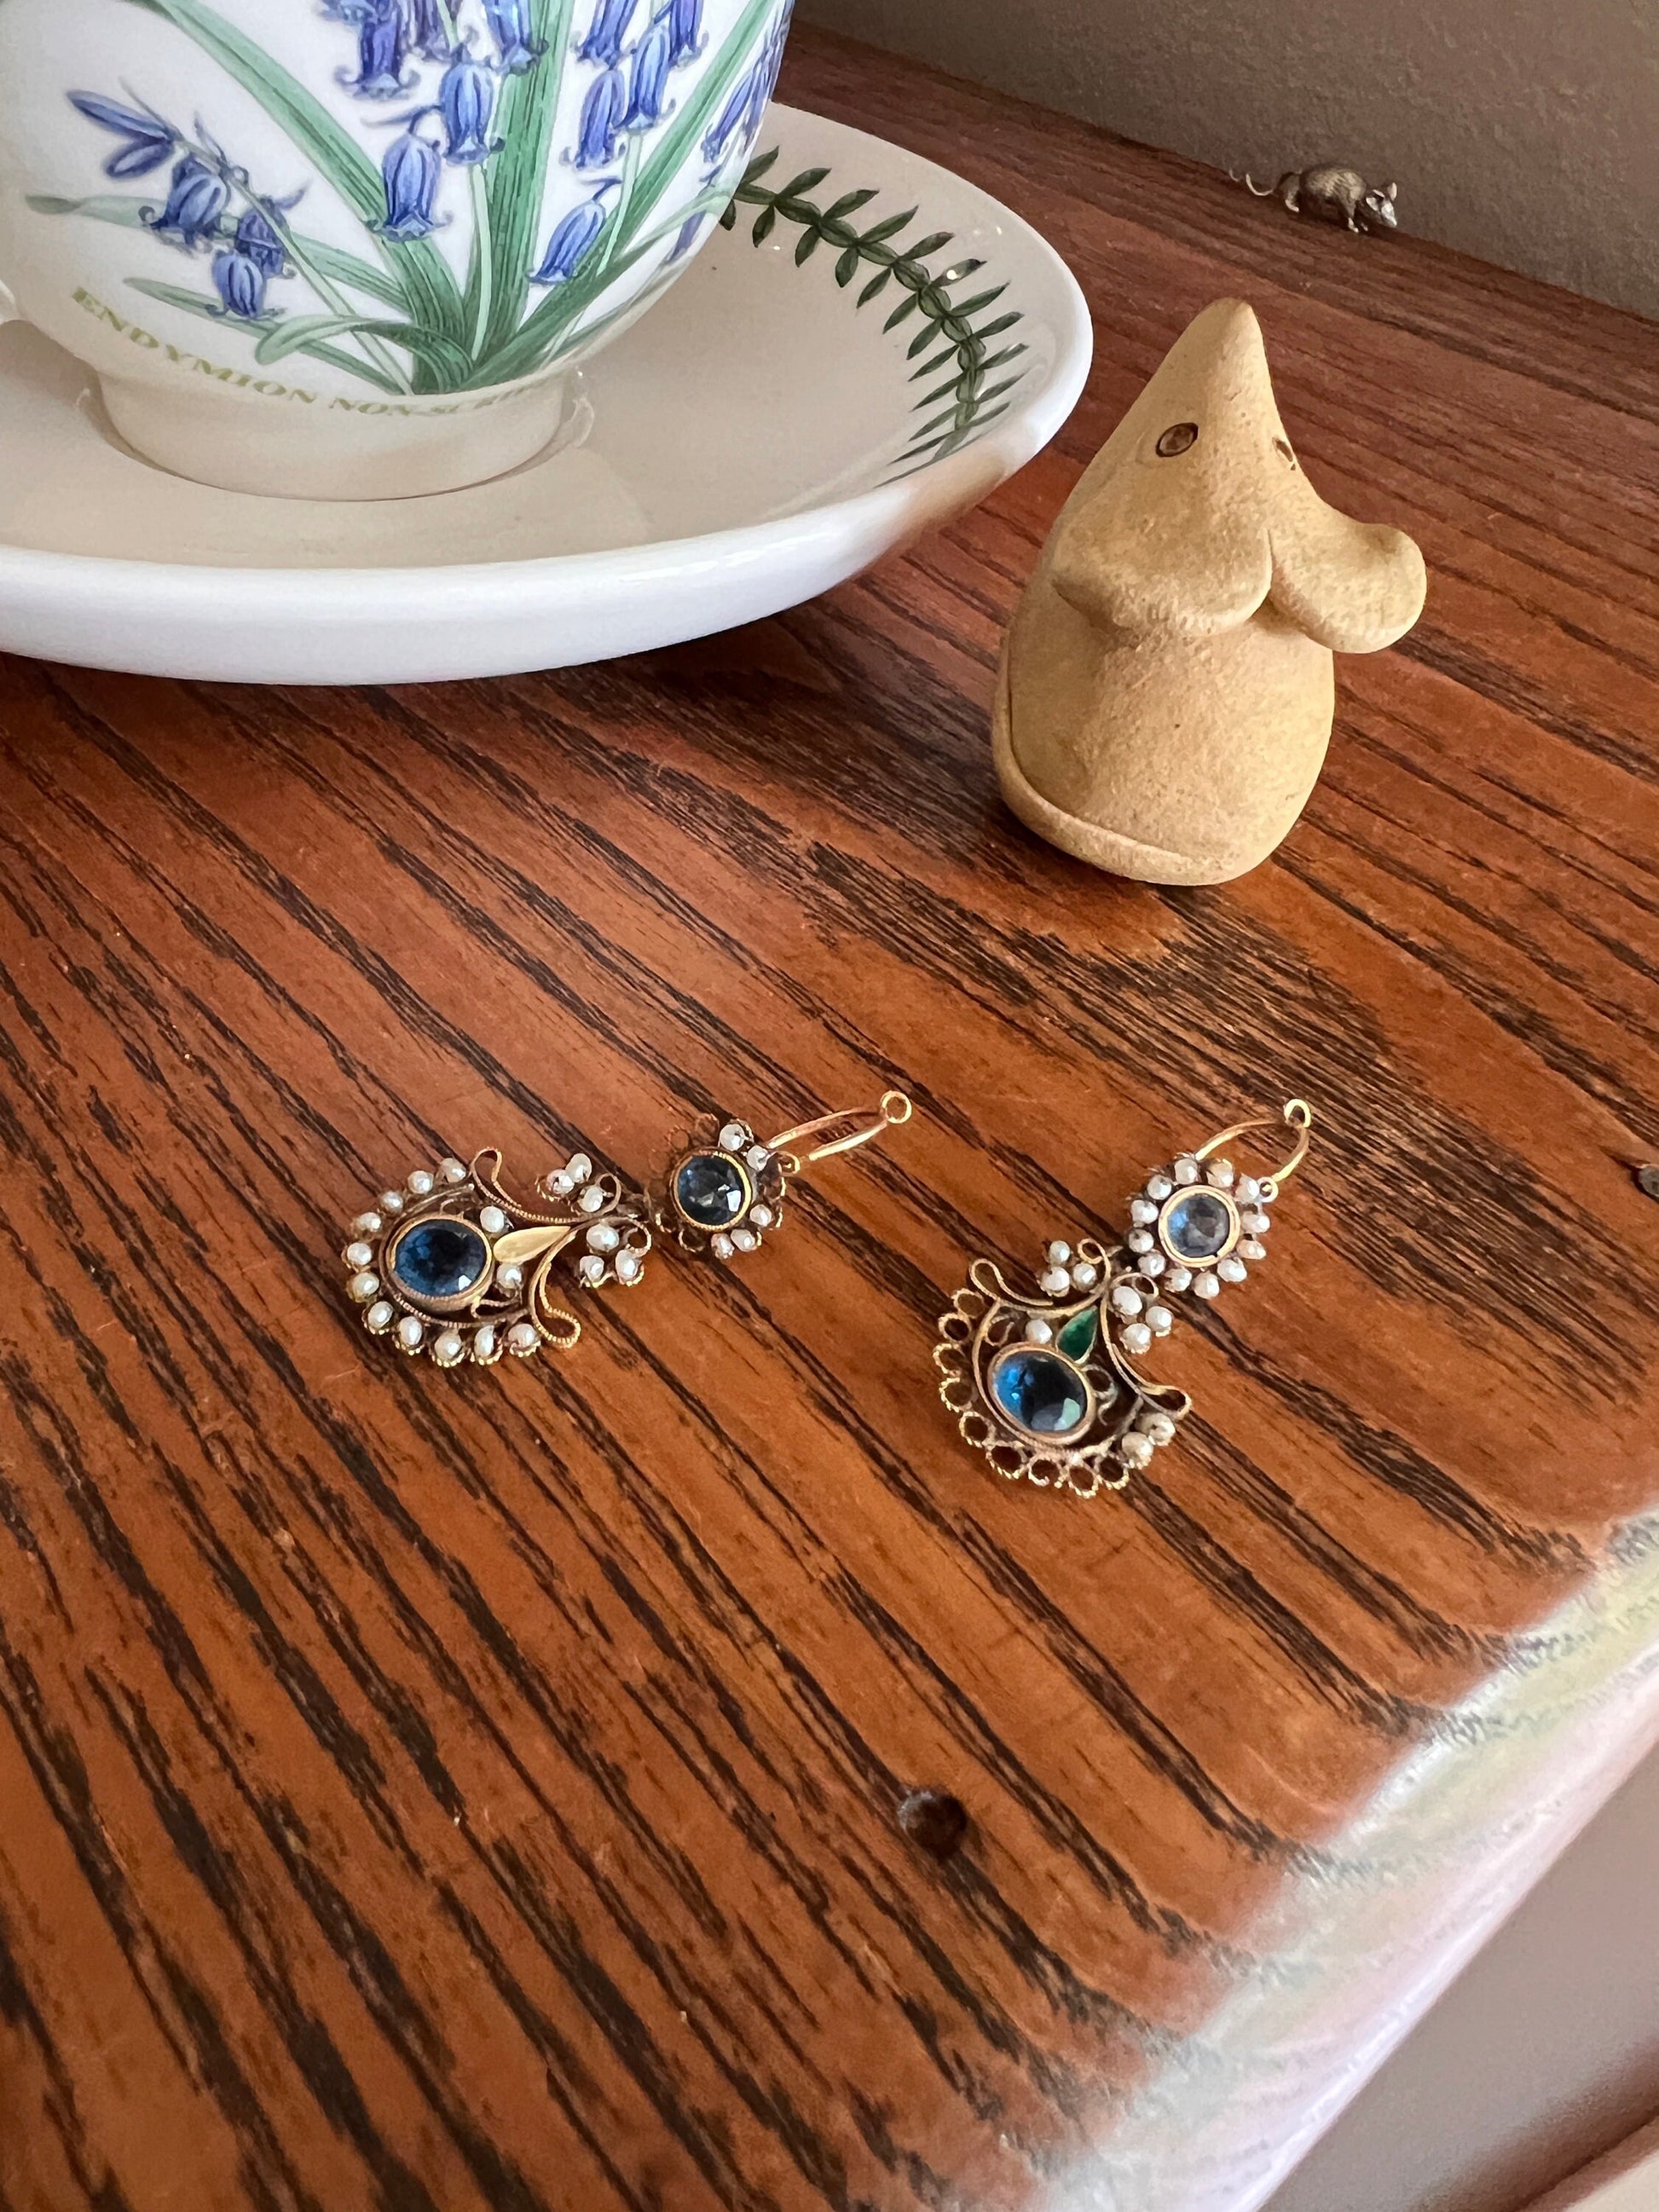 PEACOCK Rare 200 Year Old FRENCH Day to Night Dangle Dormeuse Earrings 18k Gold Blue Paste Pearls Vintage Georgian Napoleon Bonaparte Gift